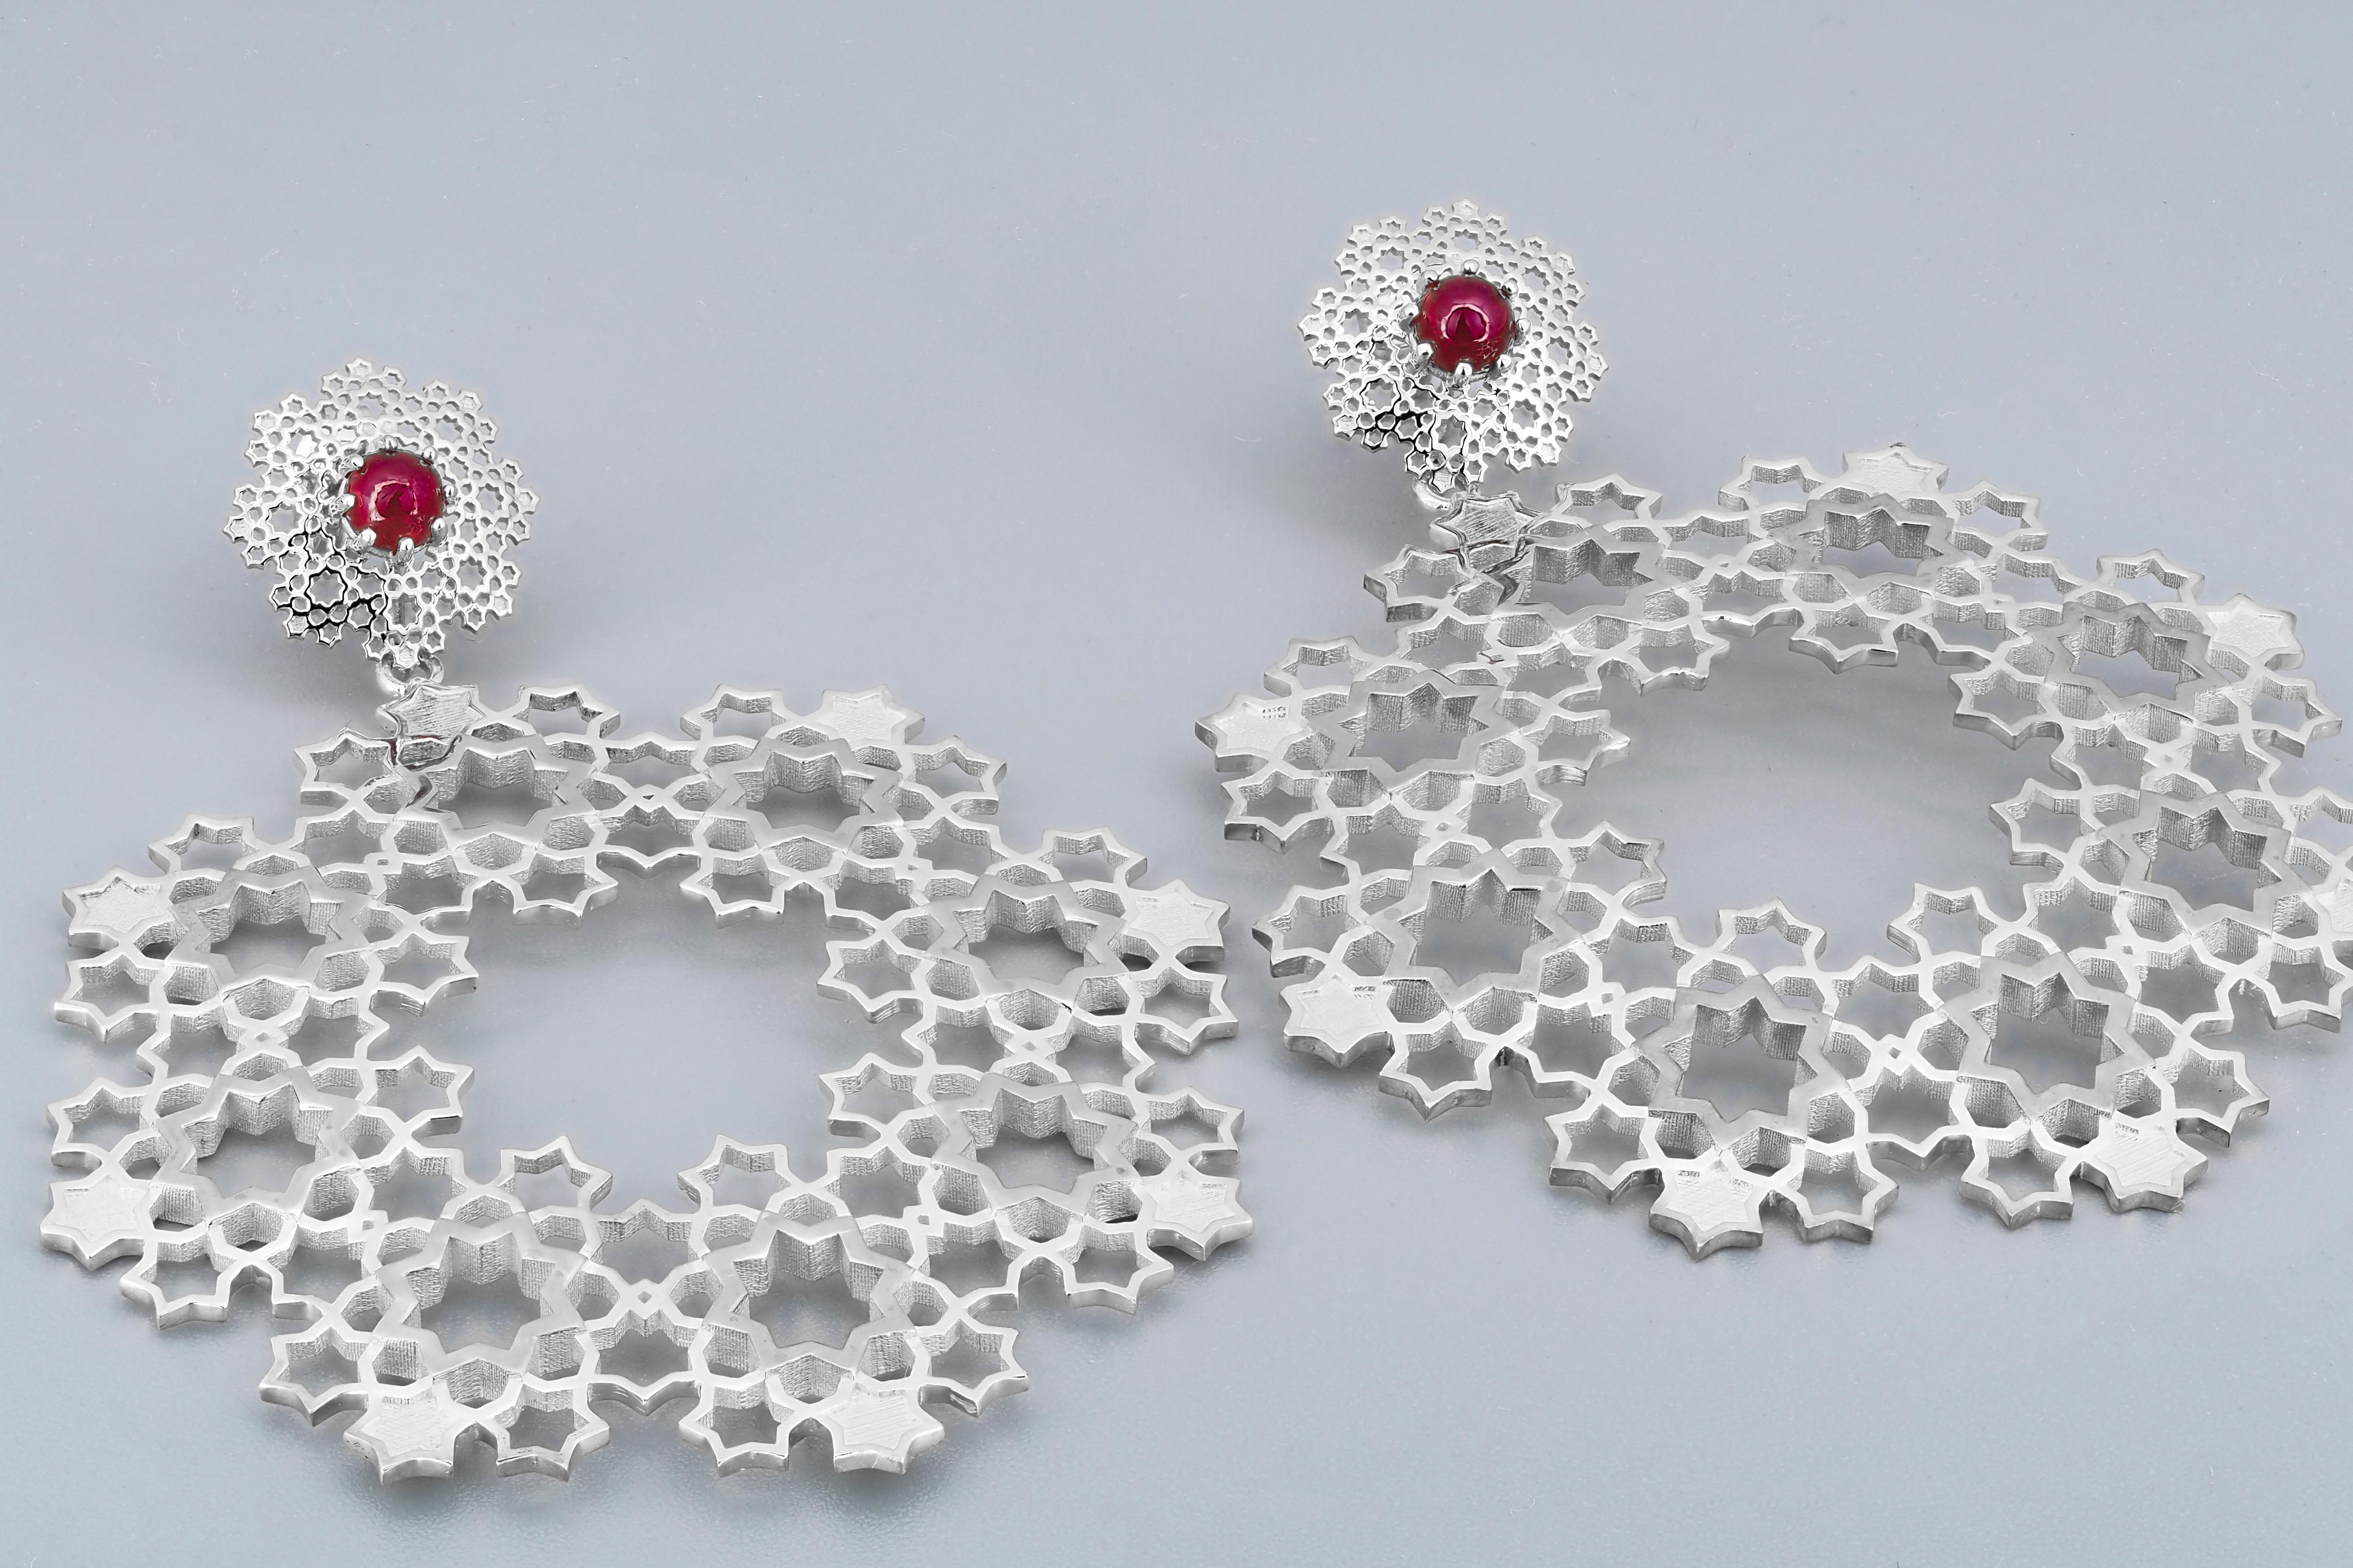 Genuine rubies earrings. Natural ruby earrings. Different type wearring massive earrings with rubies - lower part removable.

Made of 925 silver  

You can wear earring in different ways: as studs (for everyday wearring) and as a massive earrings.